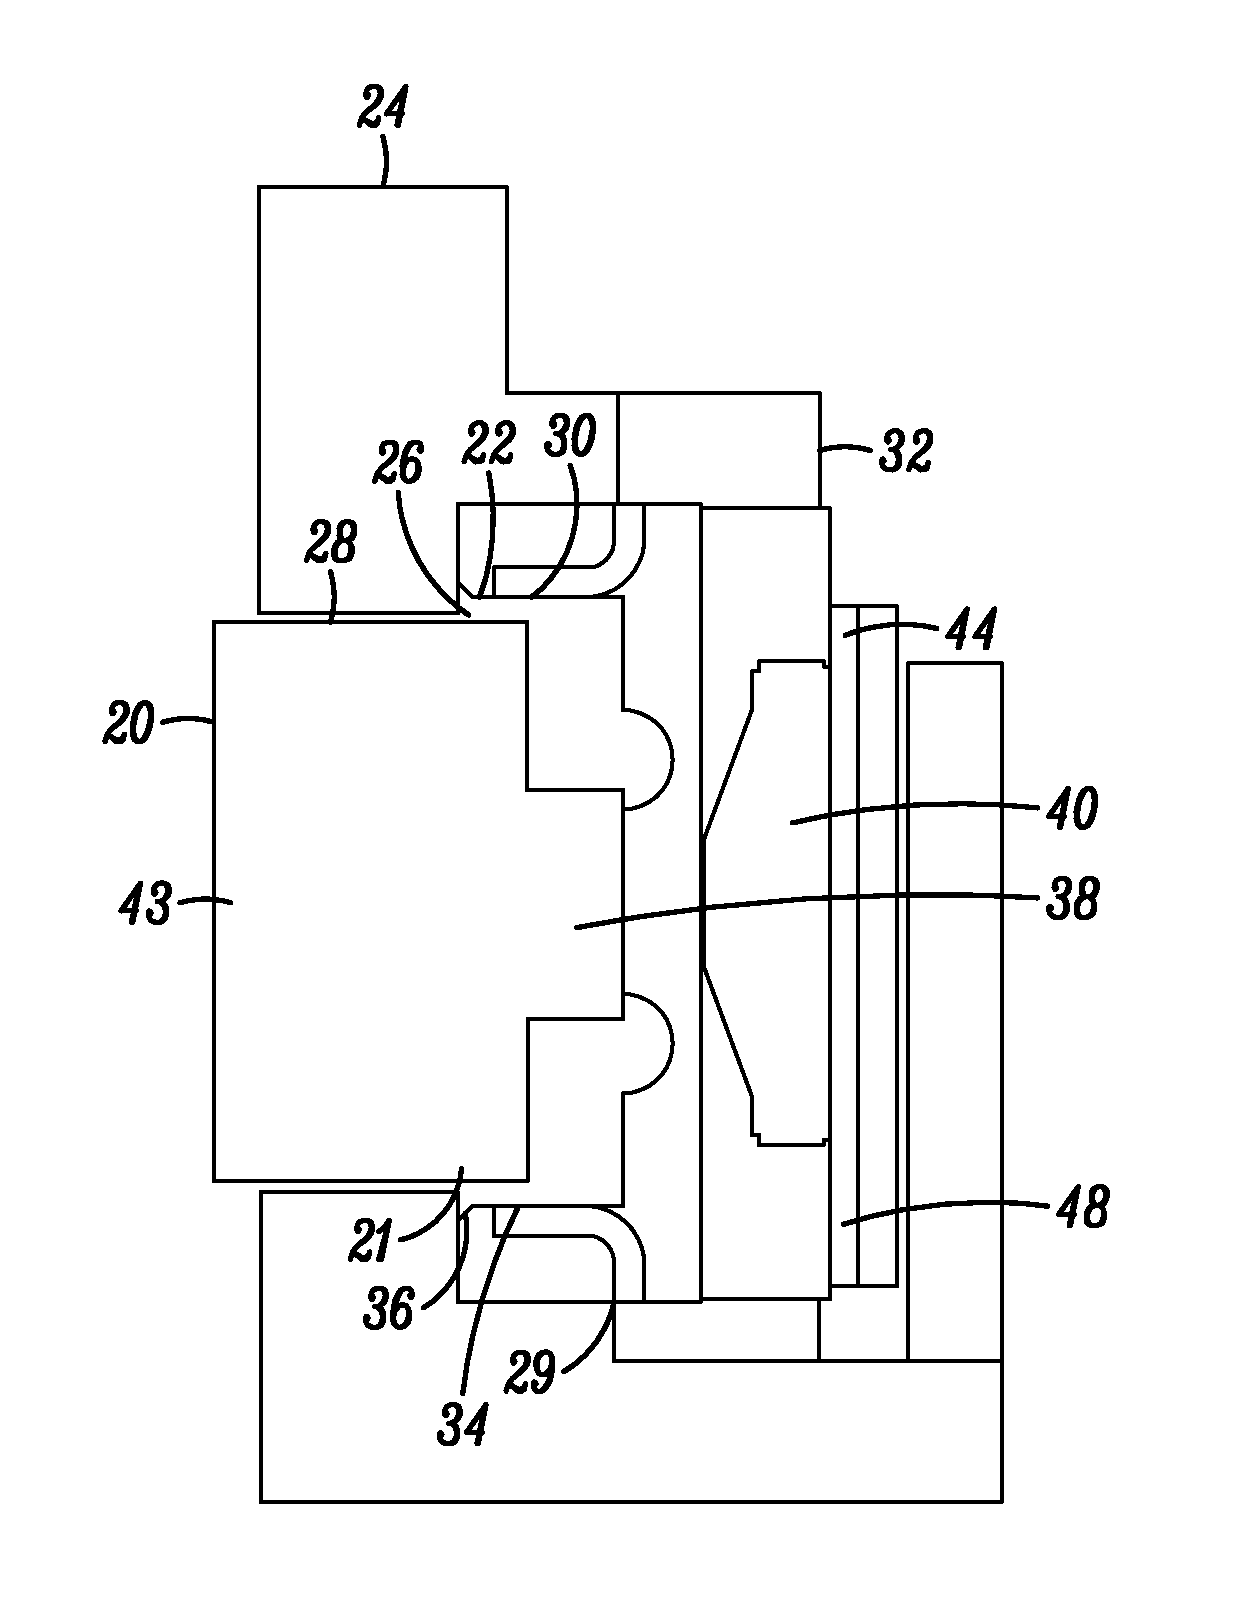 Water sealing the side key system on an electronic device